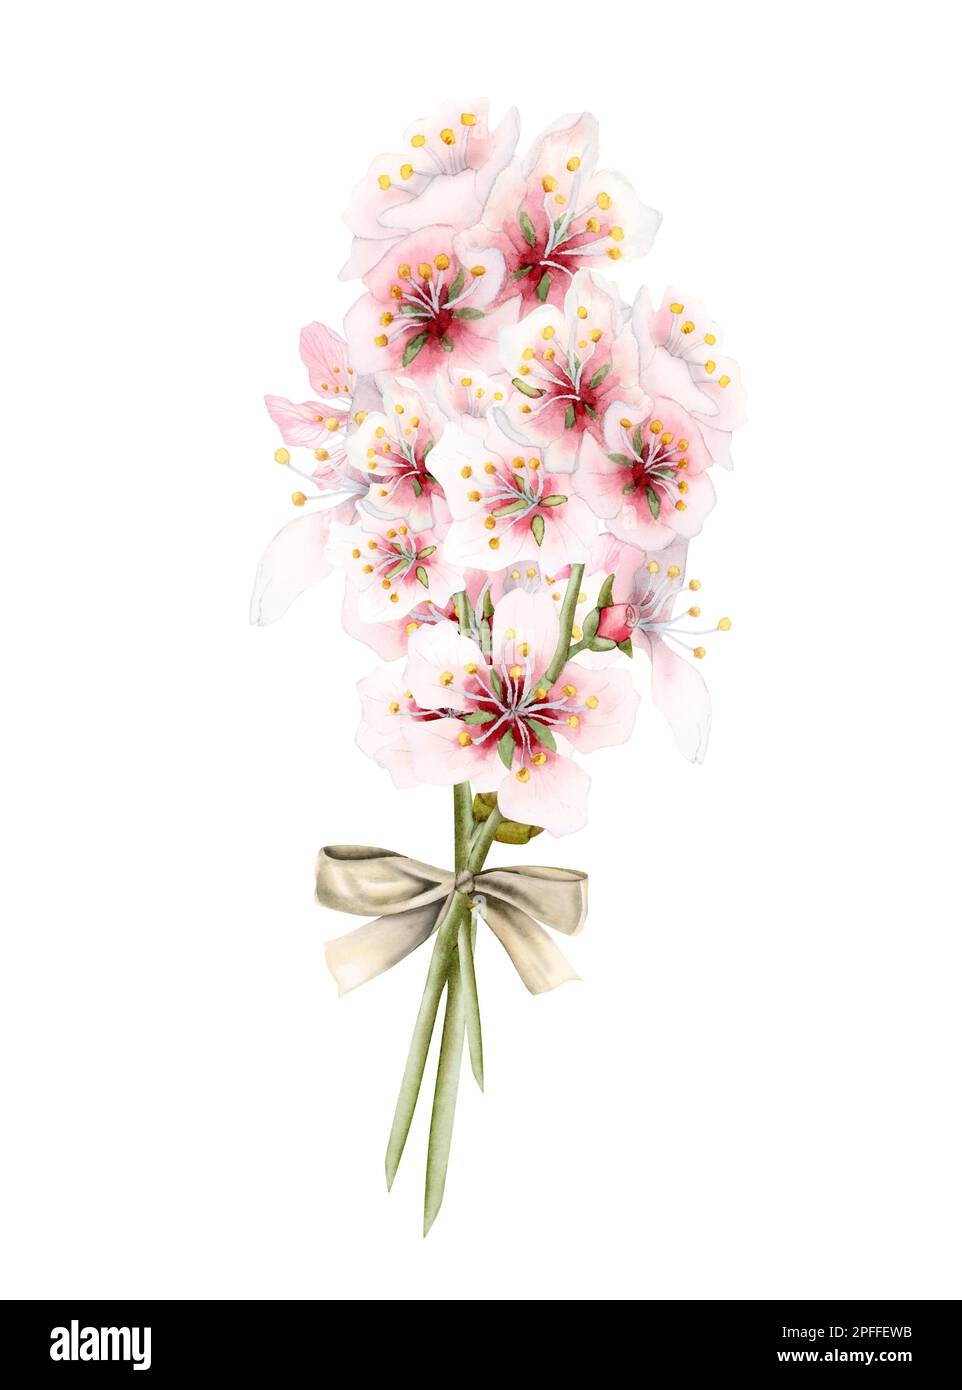 Almond flowers branches bouquet with gold ribbon bow. Watercolor white pink cherry blossom isolated on white background. Stock Photo